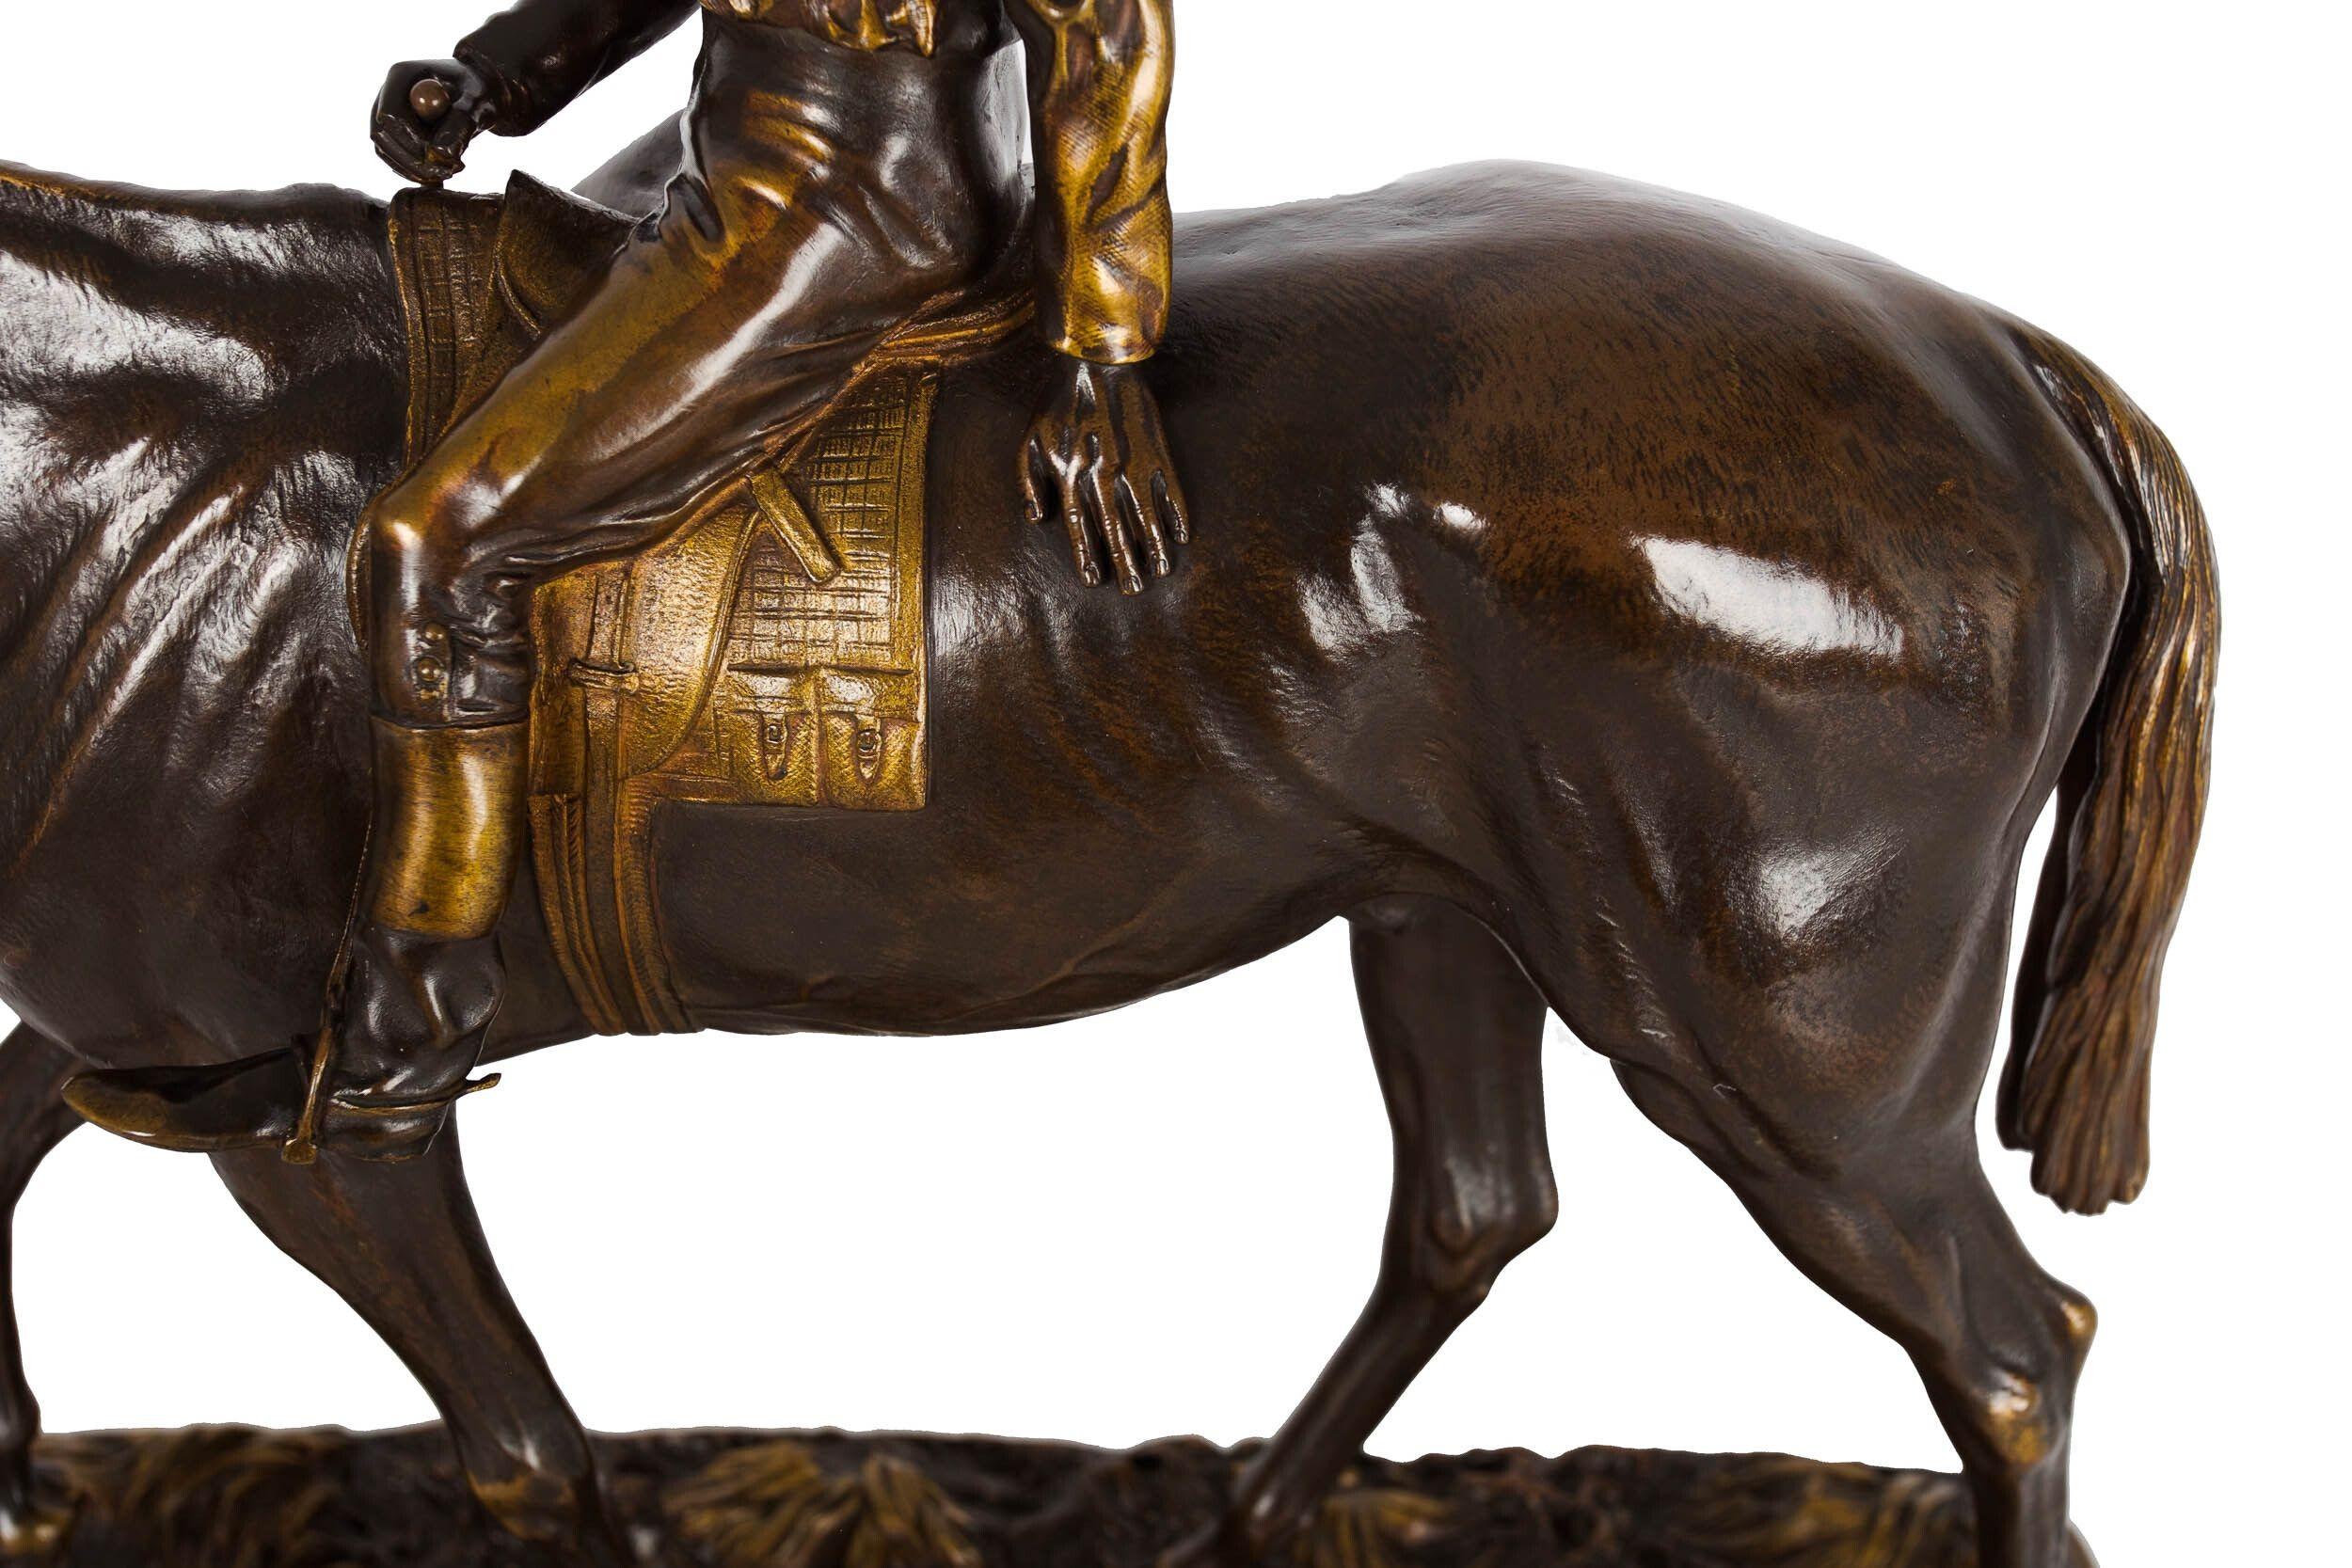 19th Century Rare and Fine Antique Bronze Sculpture “Horse and Jockey” by A.E. Dubucand For Sale